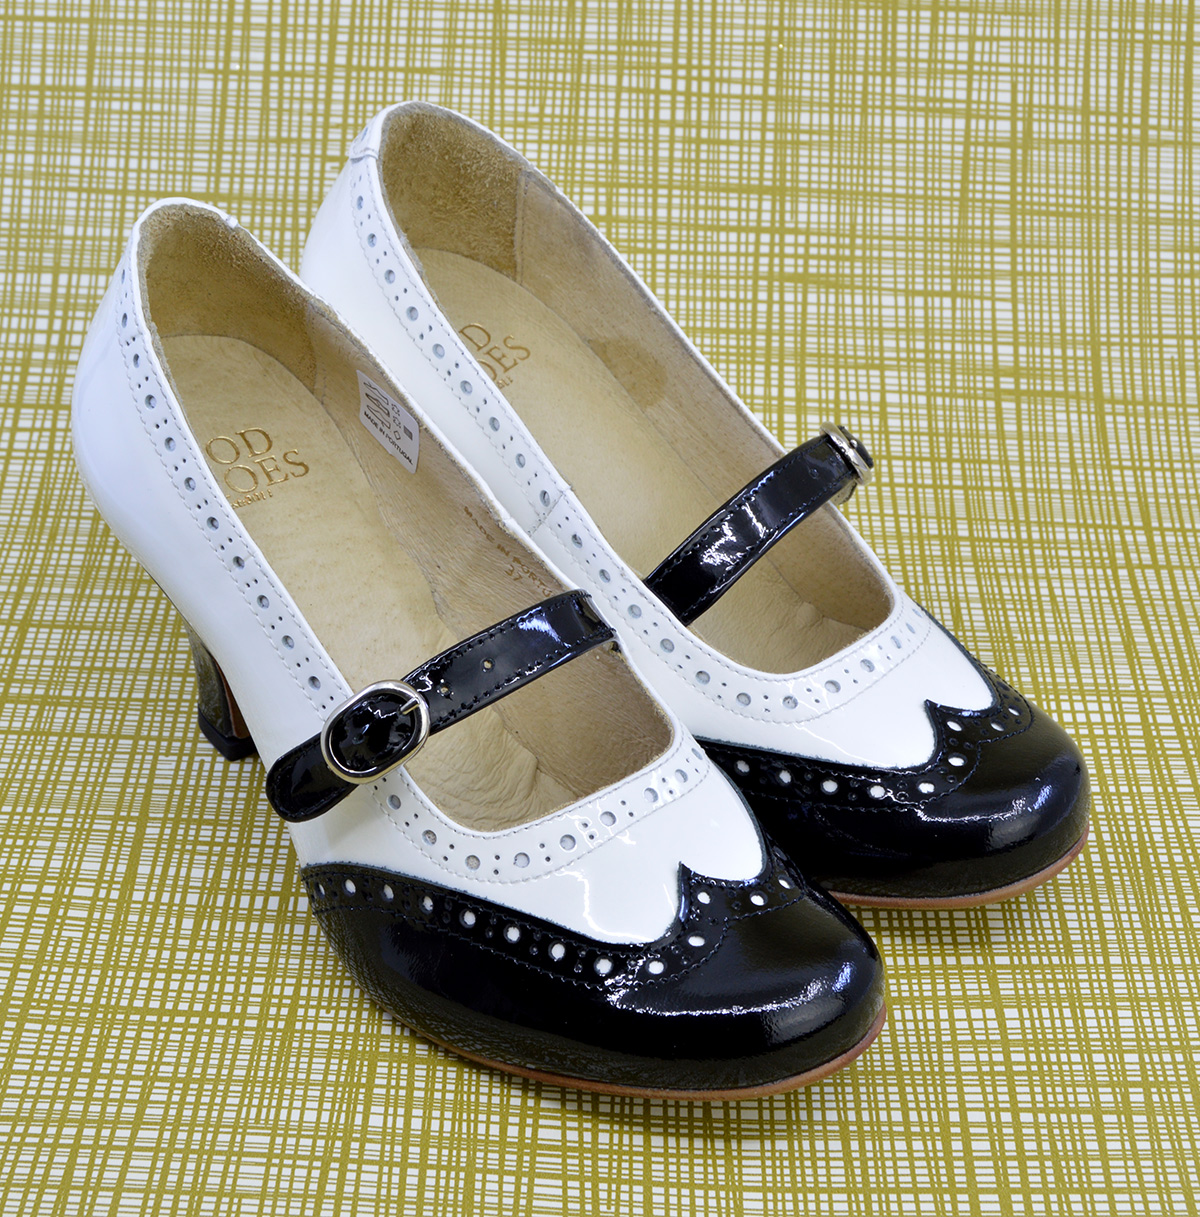 The Penny Black And White Patent Leather Mary Jane Vintage Retro